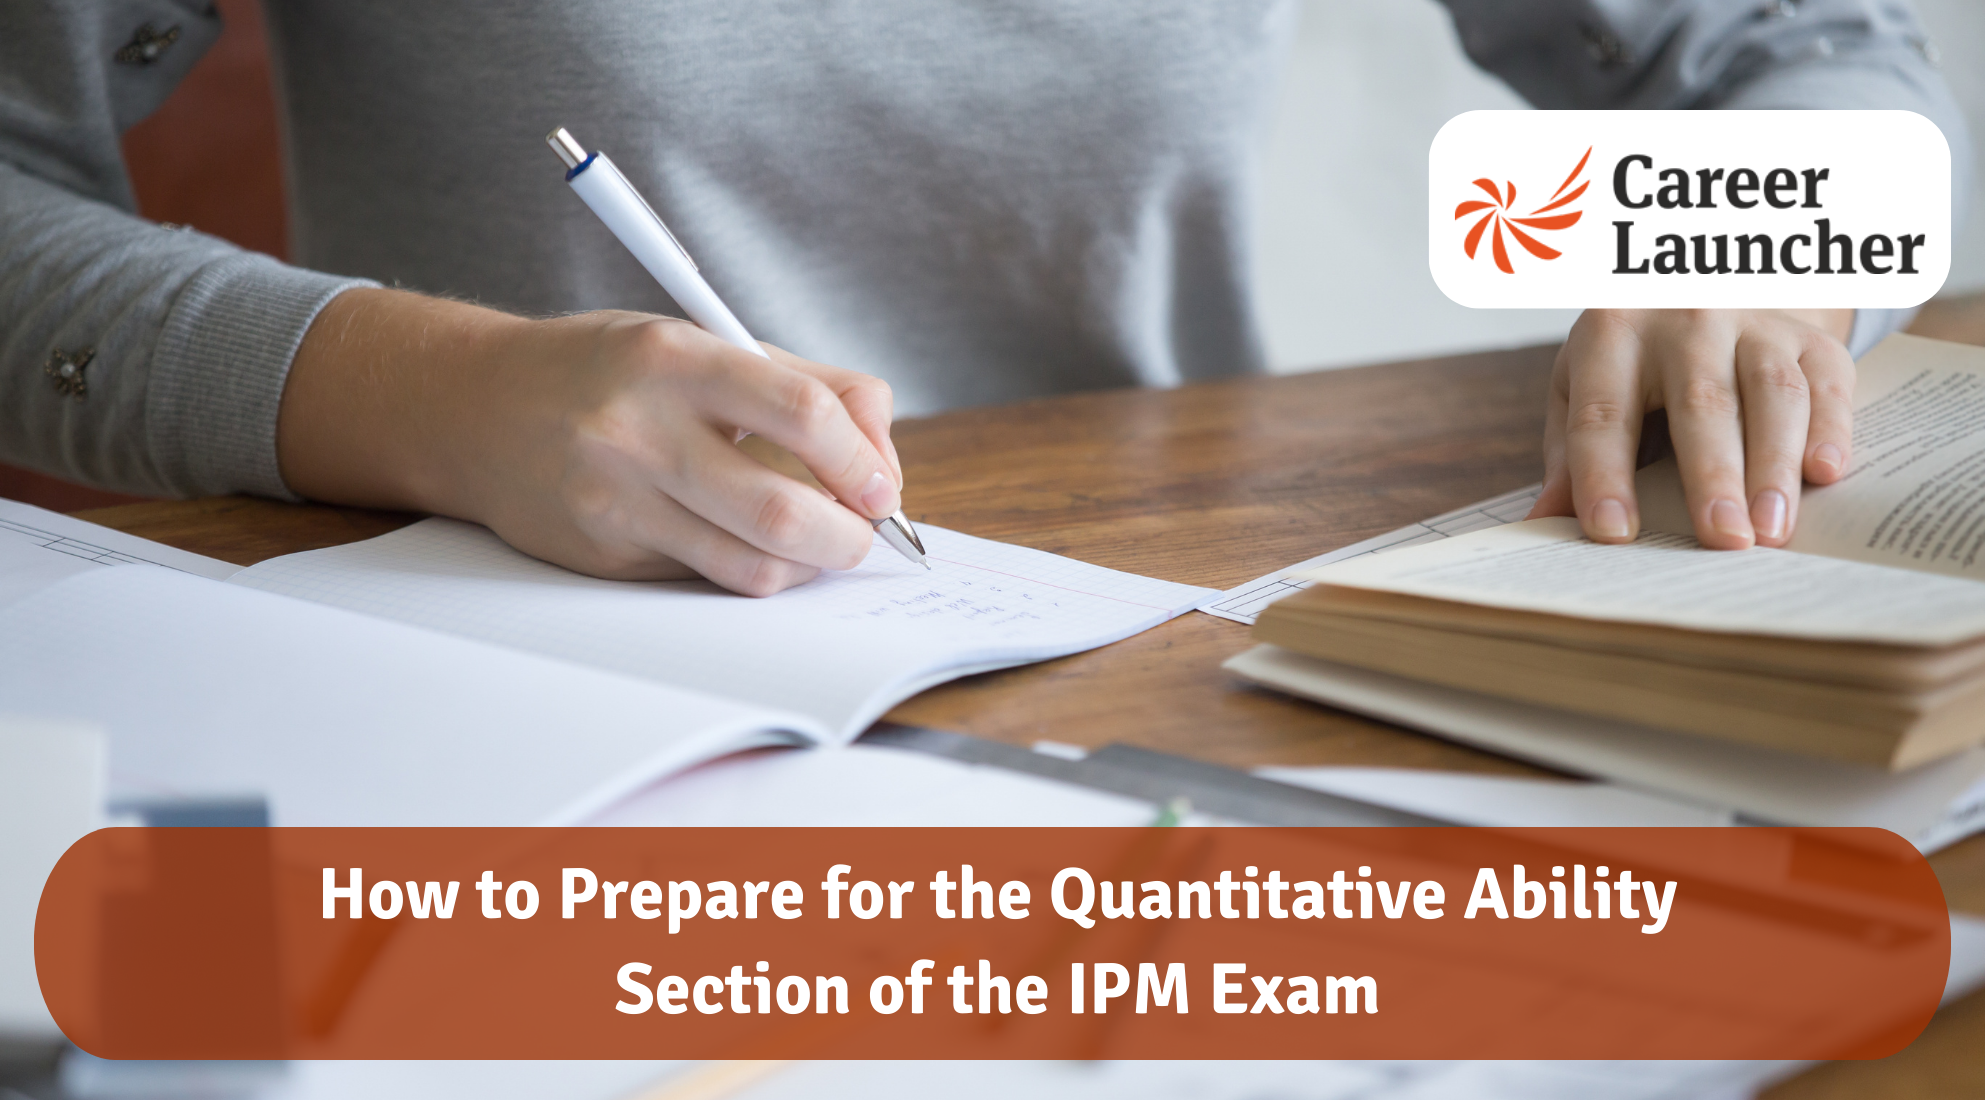 How to Prepare for the Quantitative Ability Section of the IPM Exam 